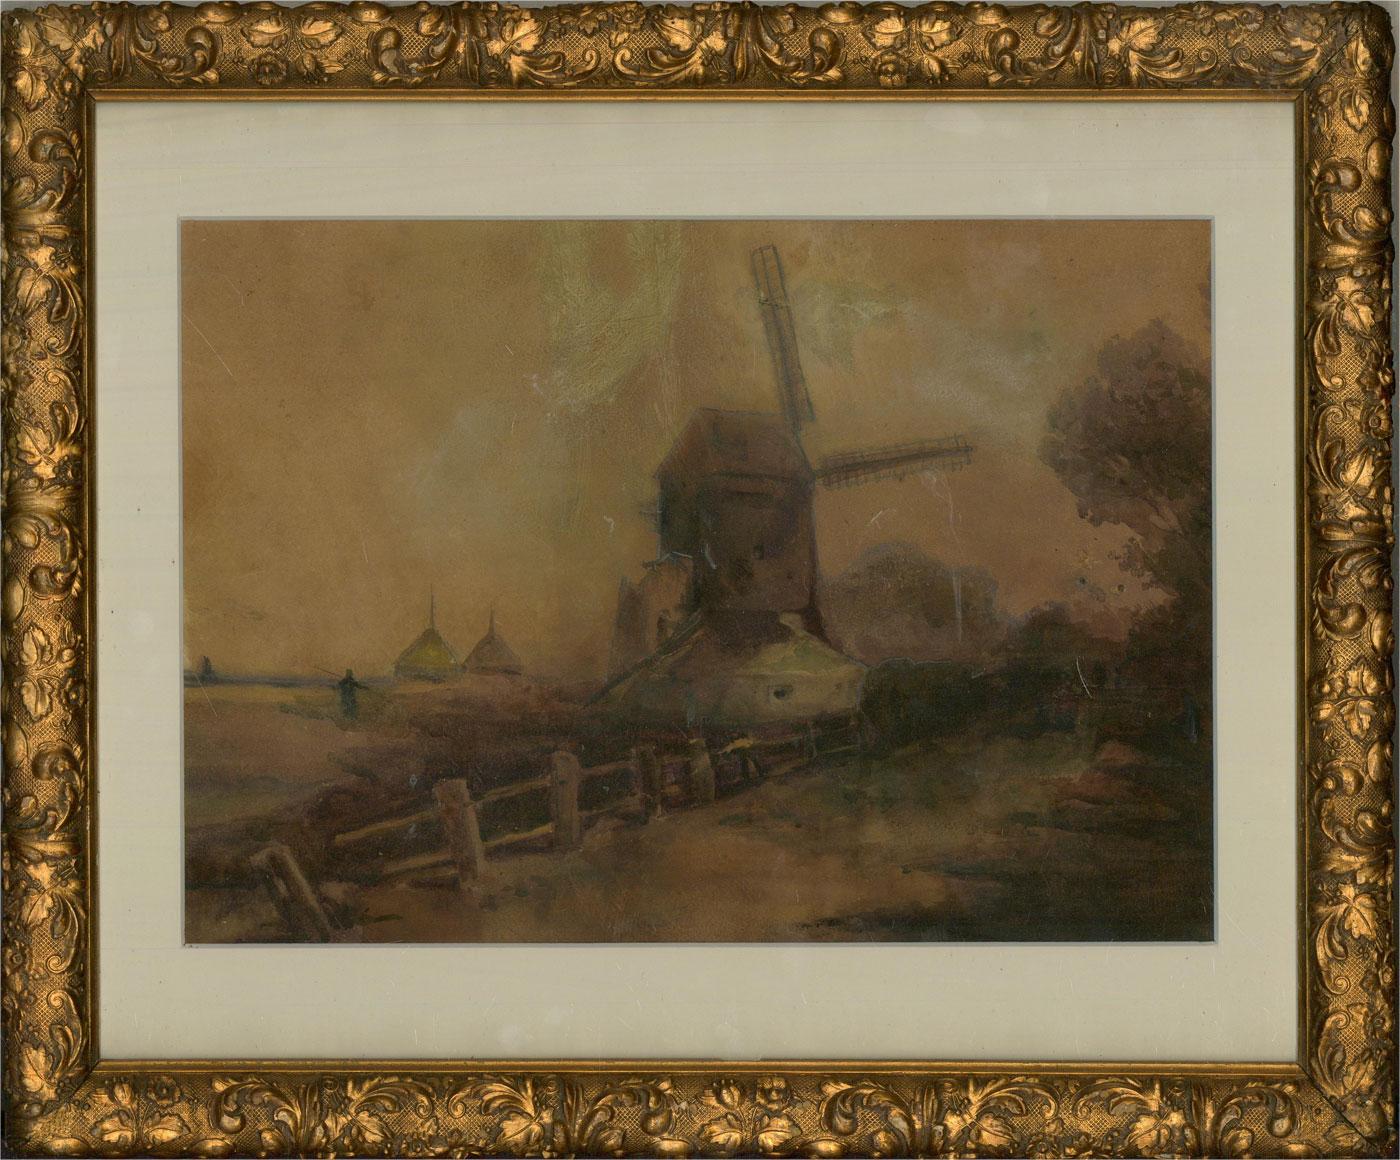 An atmospheric and moody watercolour landscape showing a Standermolen (Dutch windmill) in a darkened, brooding landscape. The painting is unsigned and presented in a handsome early turn of the Century foliate gilt frame boasting scrolling acanthus